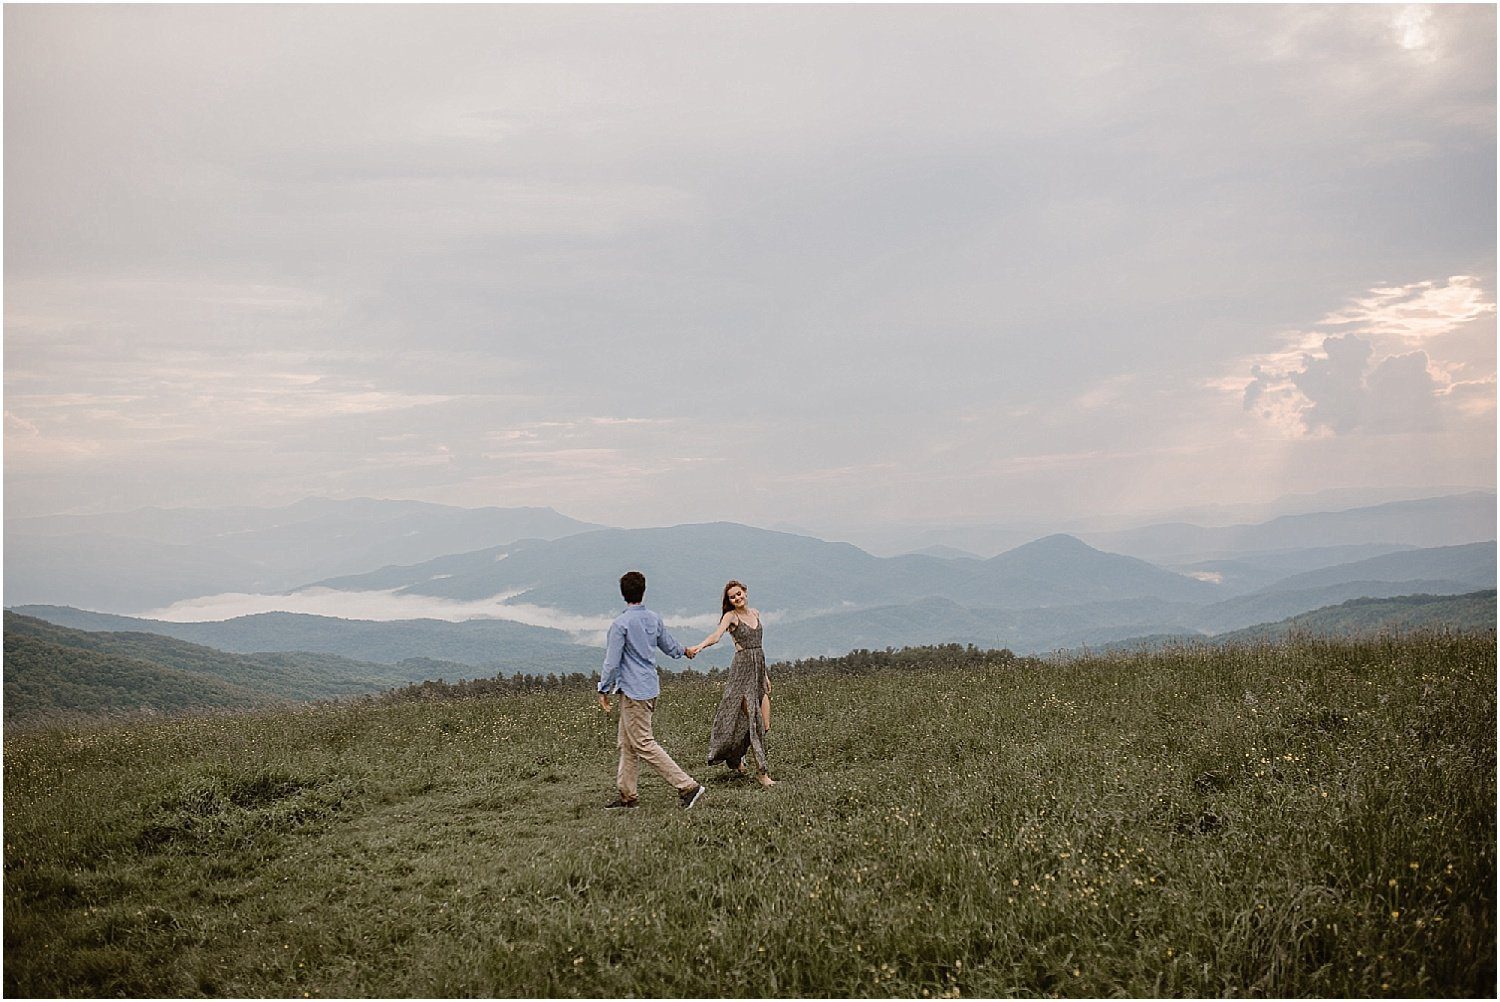 Max Patch Mountain Engagement Photos by Erin Morrison Photography